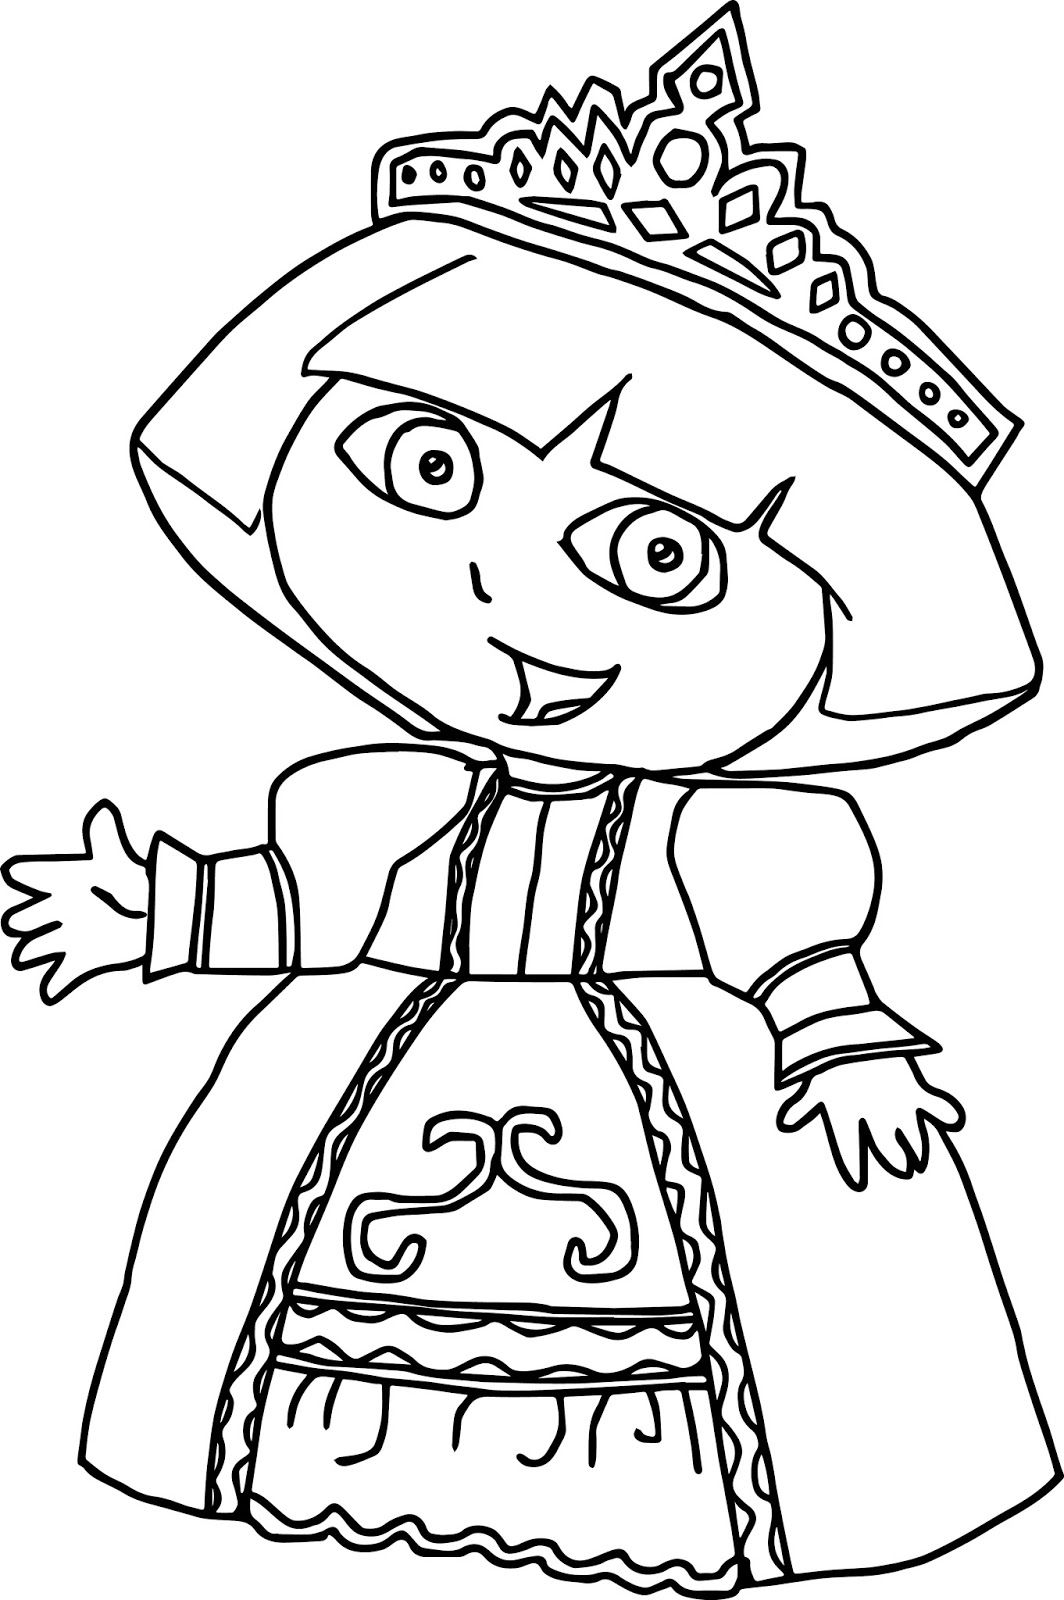 Dora The Explorer Coloring Pages ~ Coloring Pictures - Coloring Home